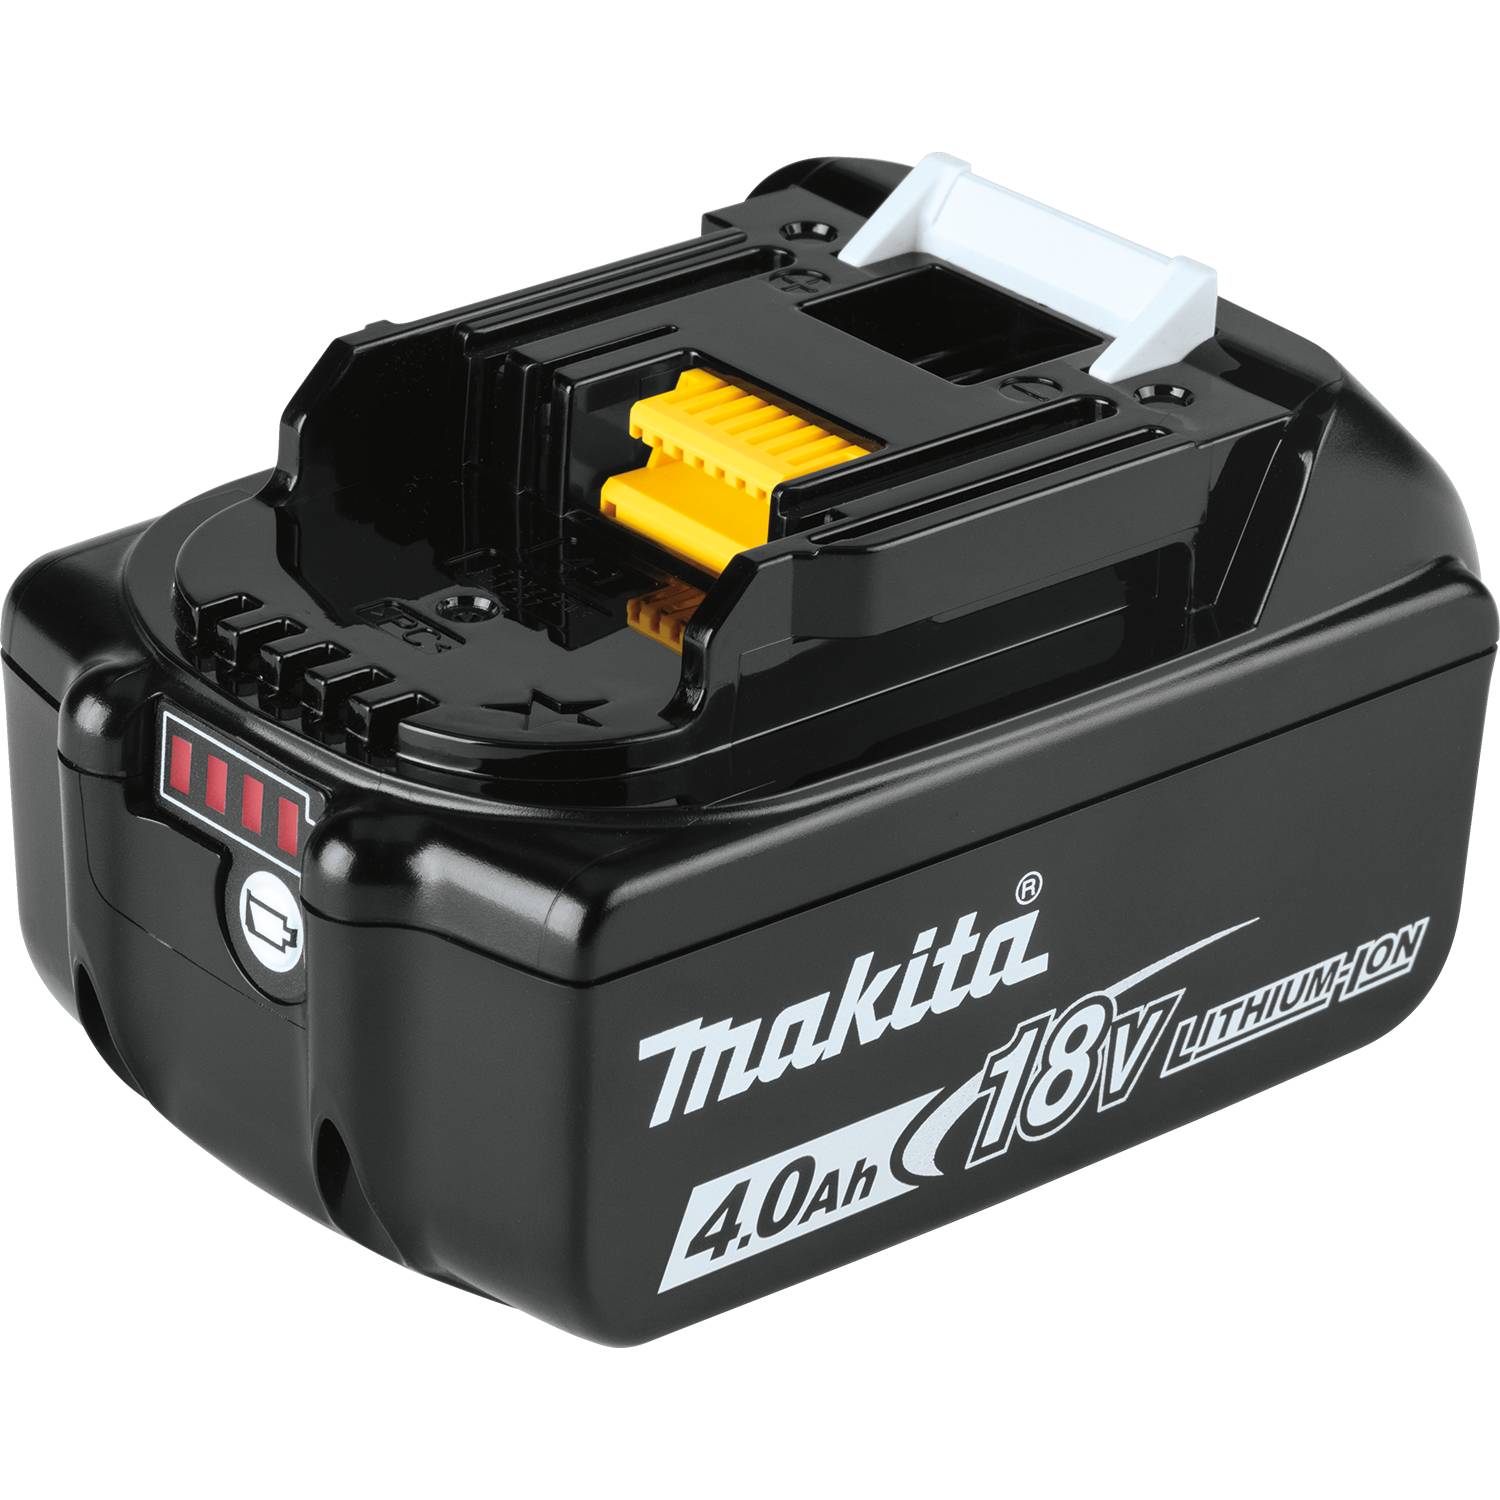 Makita Lithium Ion Brushless Cordless 1/2 Inch Driver Drill Kit from Columbia Safety